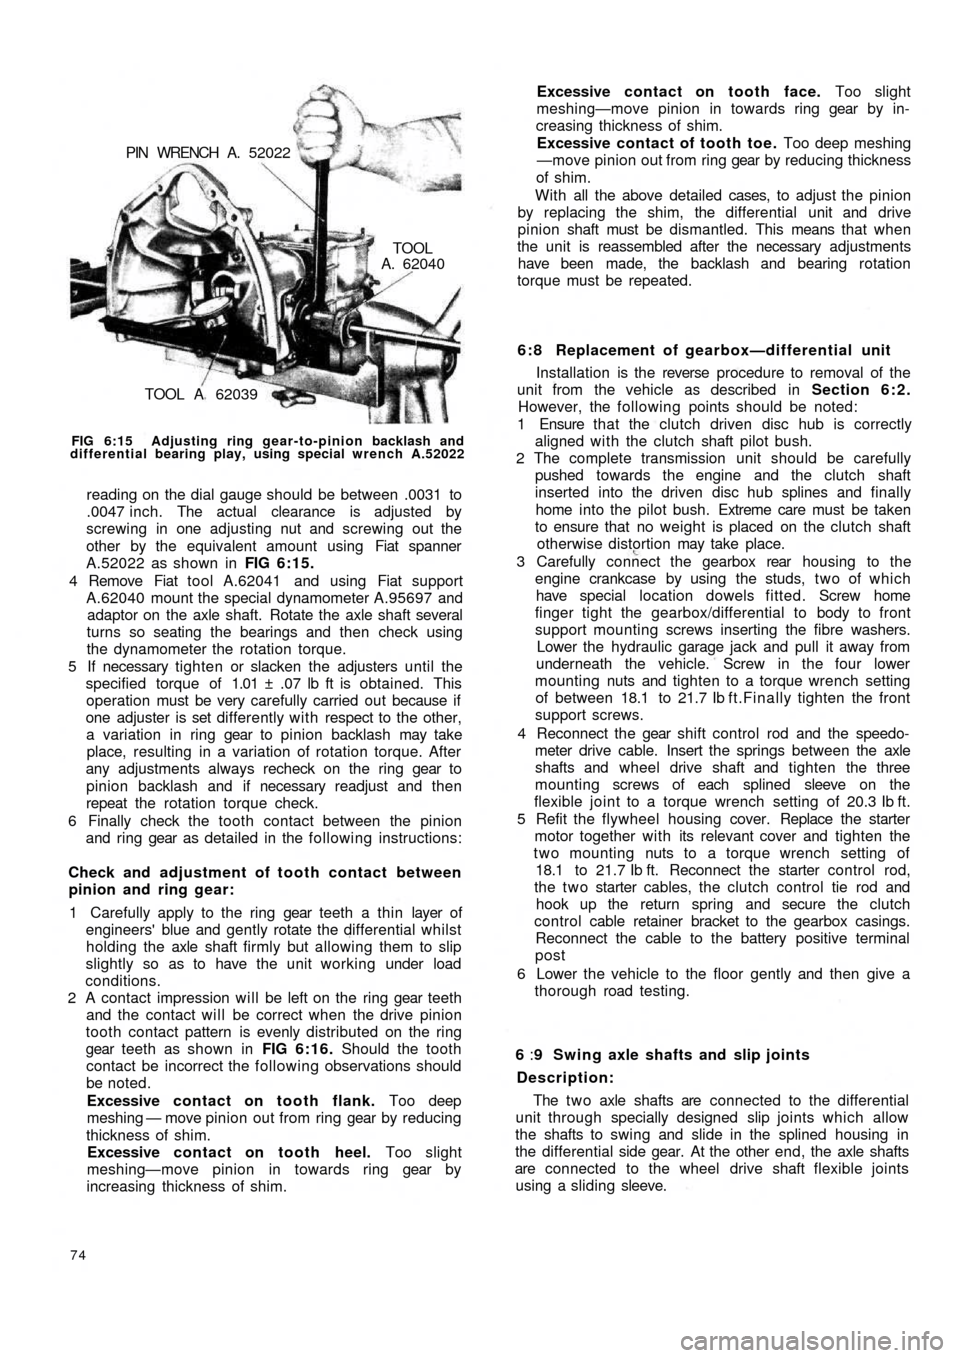 FIAT 500 1971 1.G Workshop Manual TOOL A  62039
TOOLA. 62040 PIN  WRENCH  A.  52022
FIG 6:15  Adjusting ring gear-to-pinion backlash and
differential bearing play, using special wrench A.52022
reading on the dial gauge should be betwe